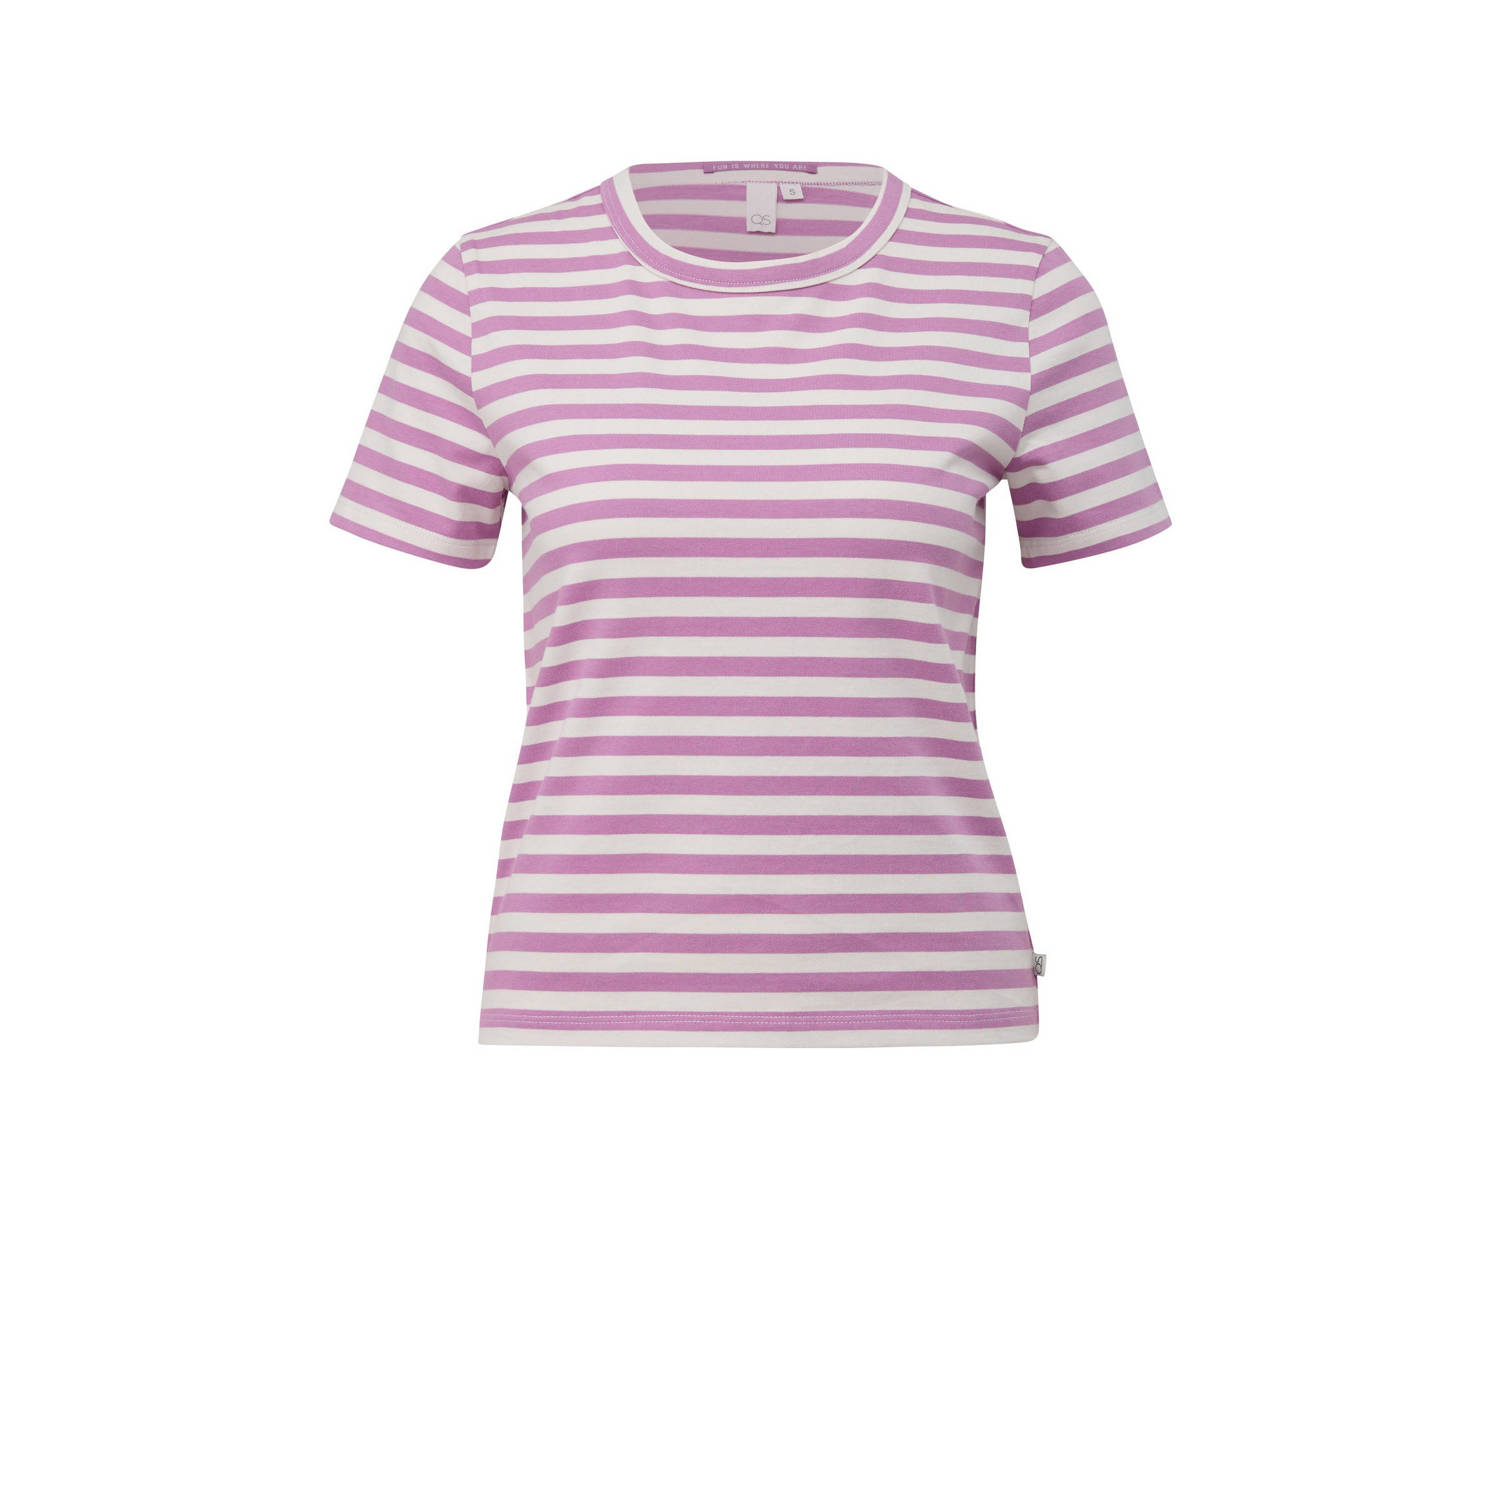 Q S by s.Oliver gestreept T-shirt lila wit